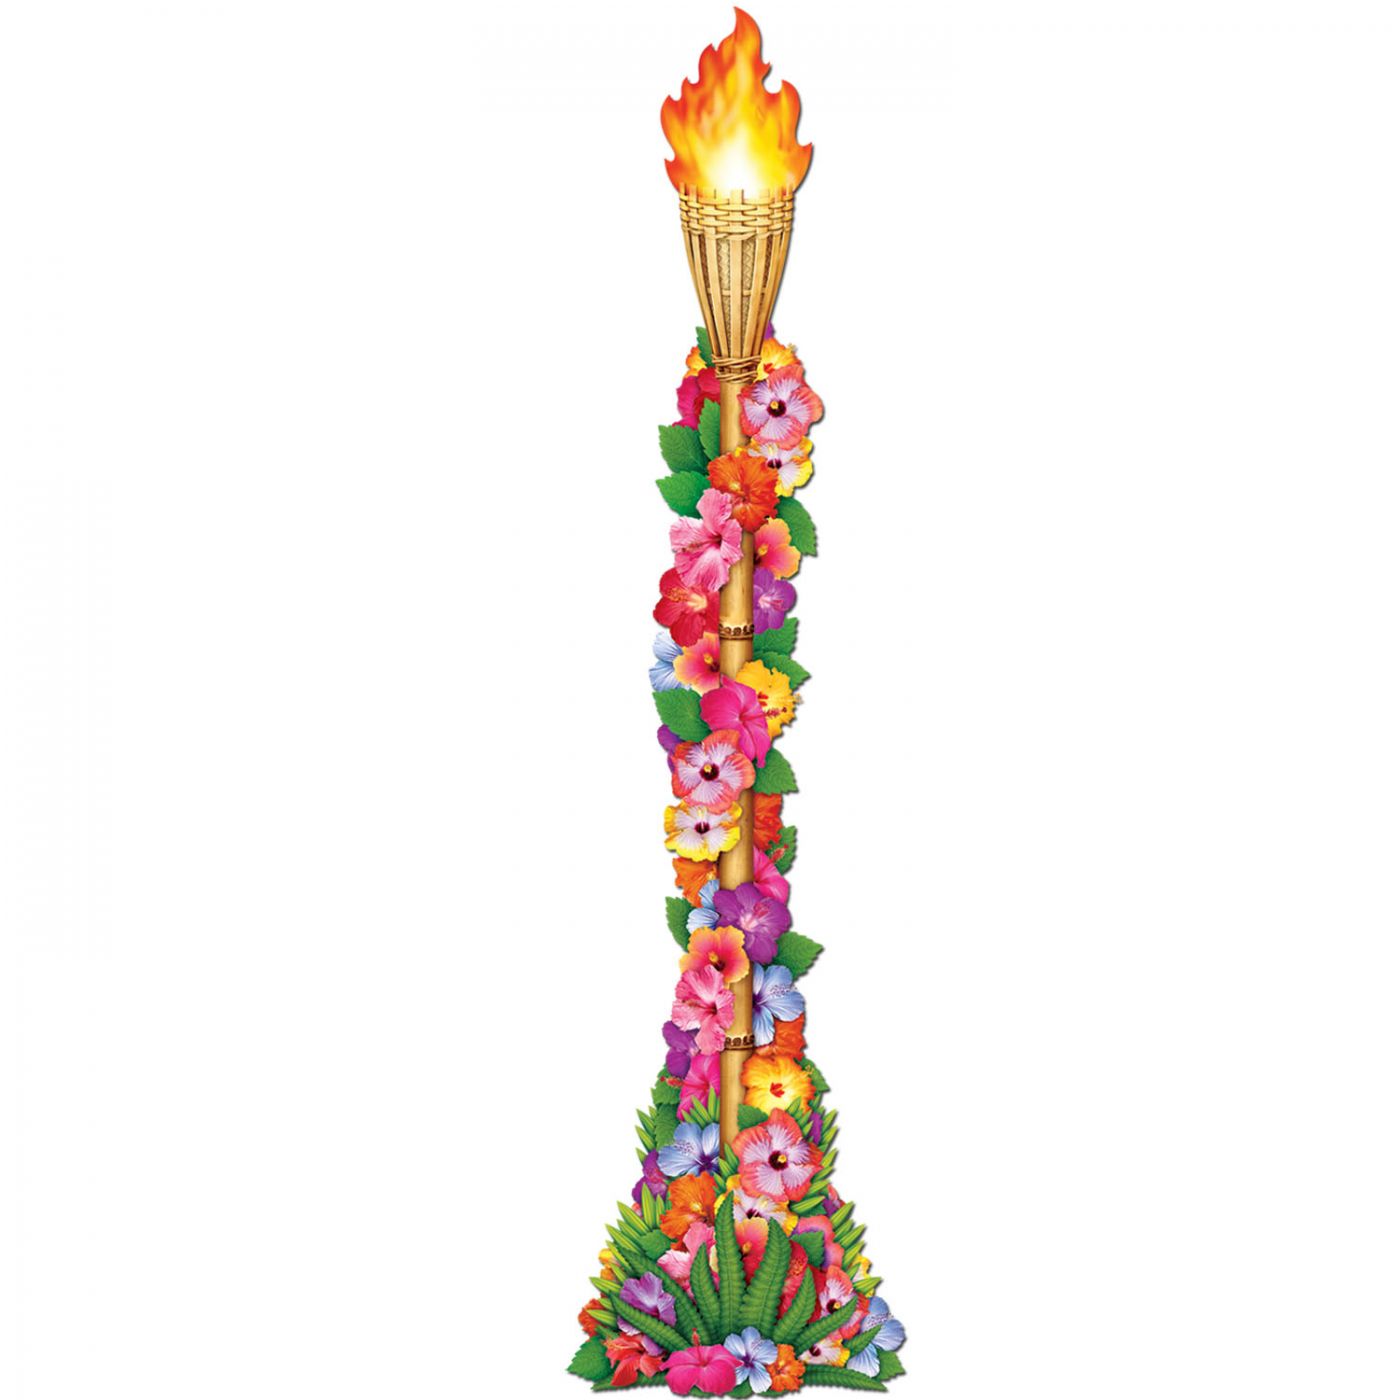 Jointed Floral Tiki Torch (12) image